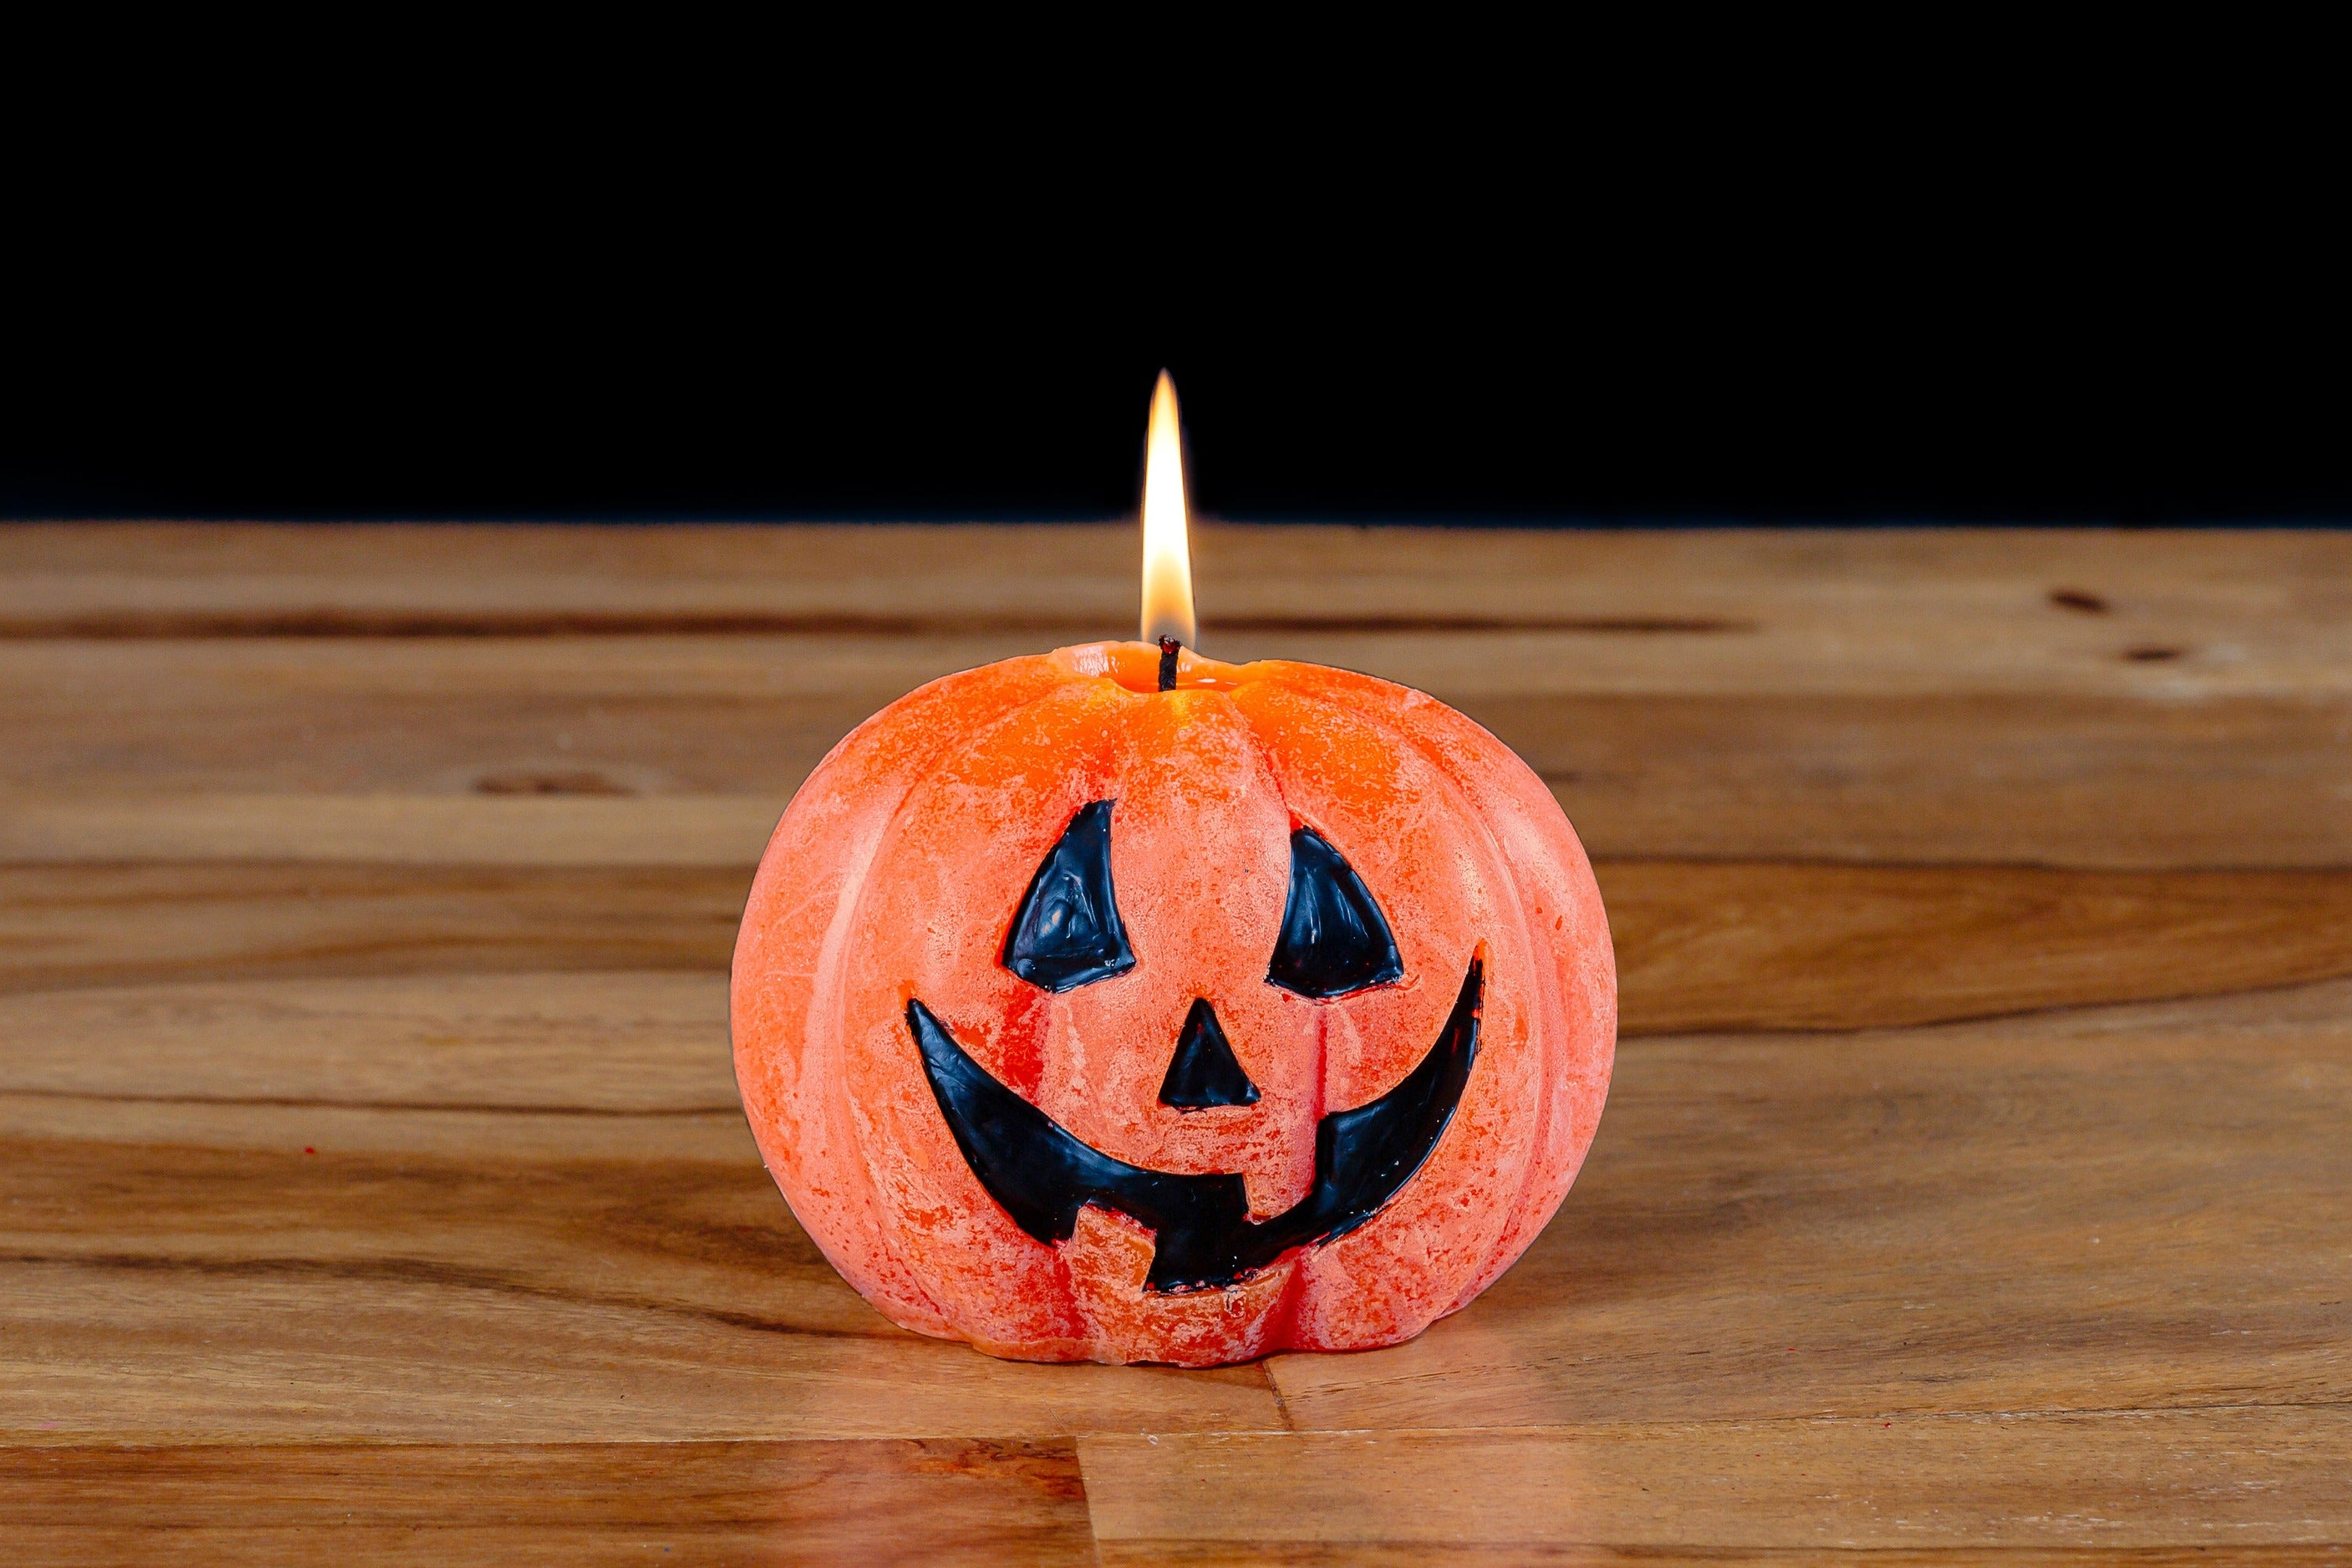 Whimsy Pumpkin candle! Orange with a Jack o' Lantern face painted on in black. This pumpkin is lit sitting on a wooden table with a black background - BOO!